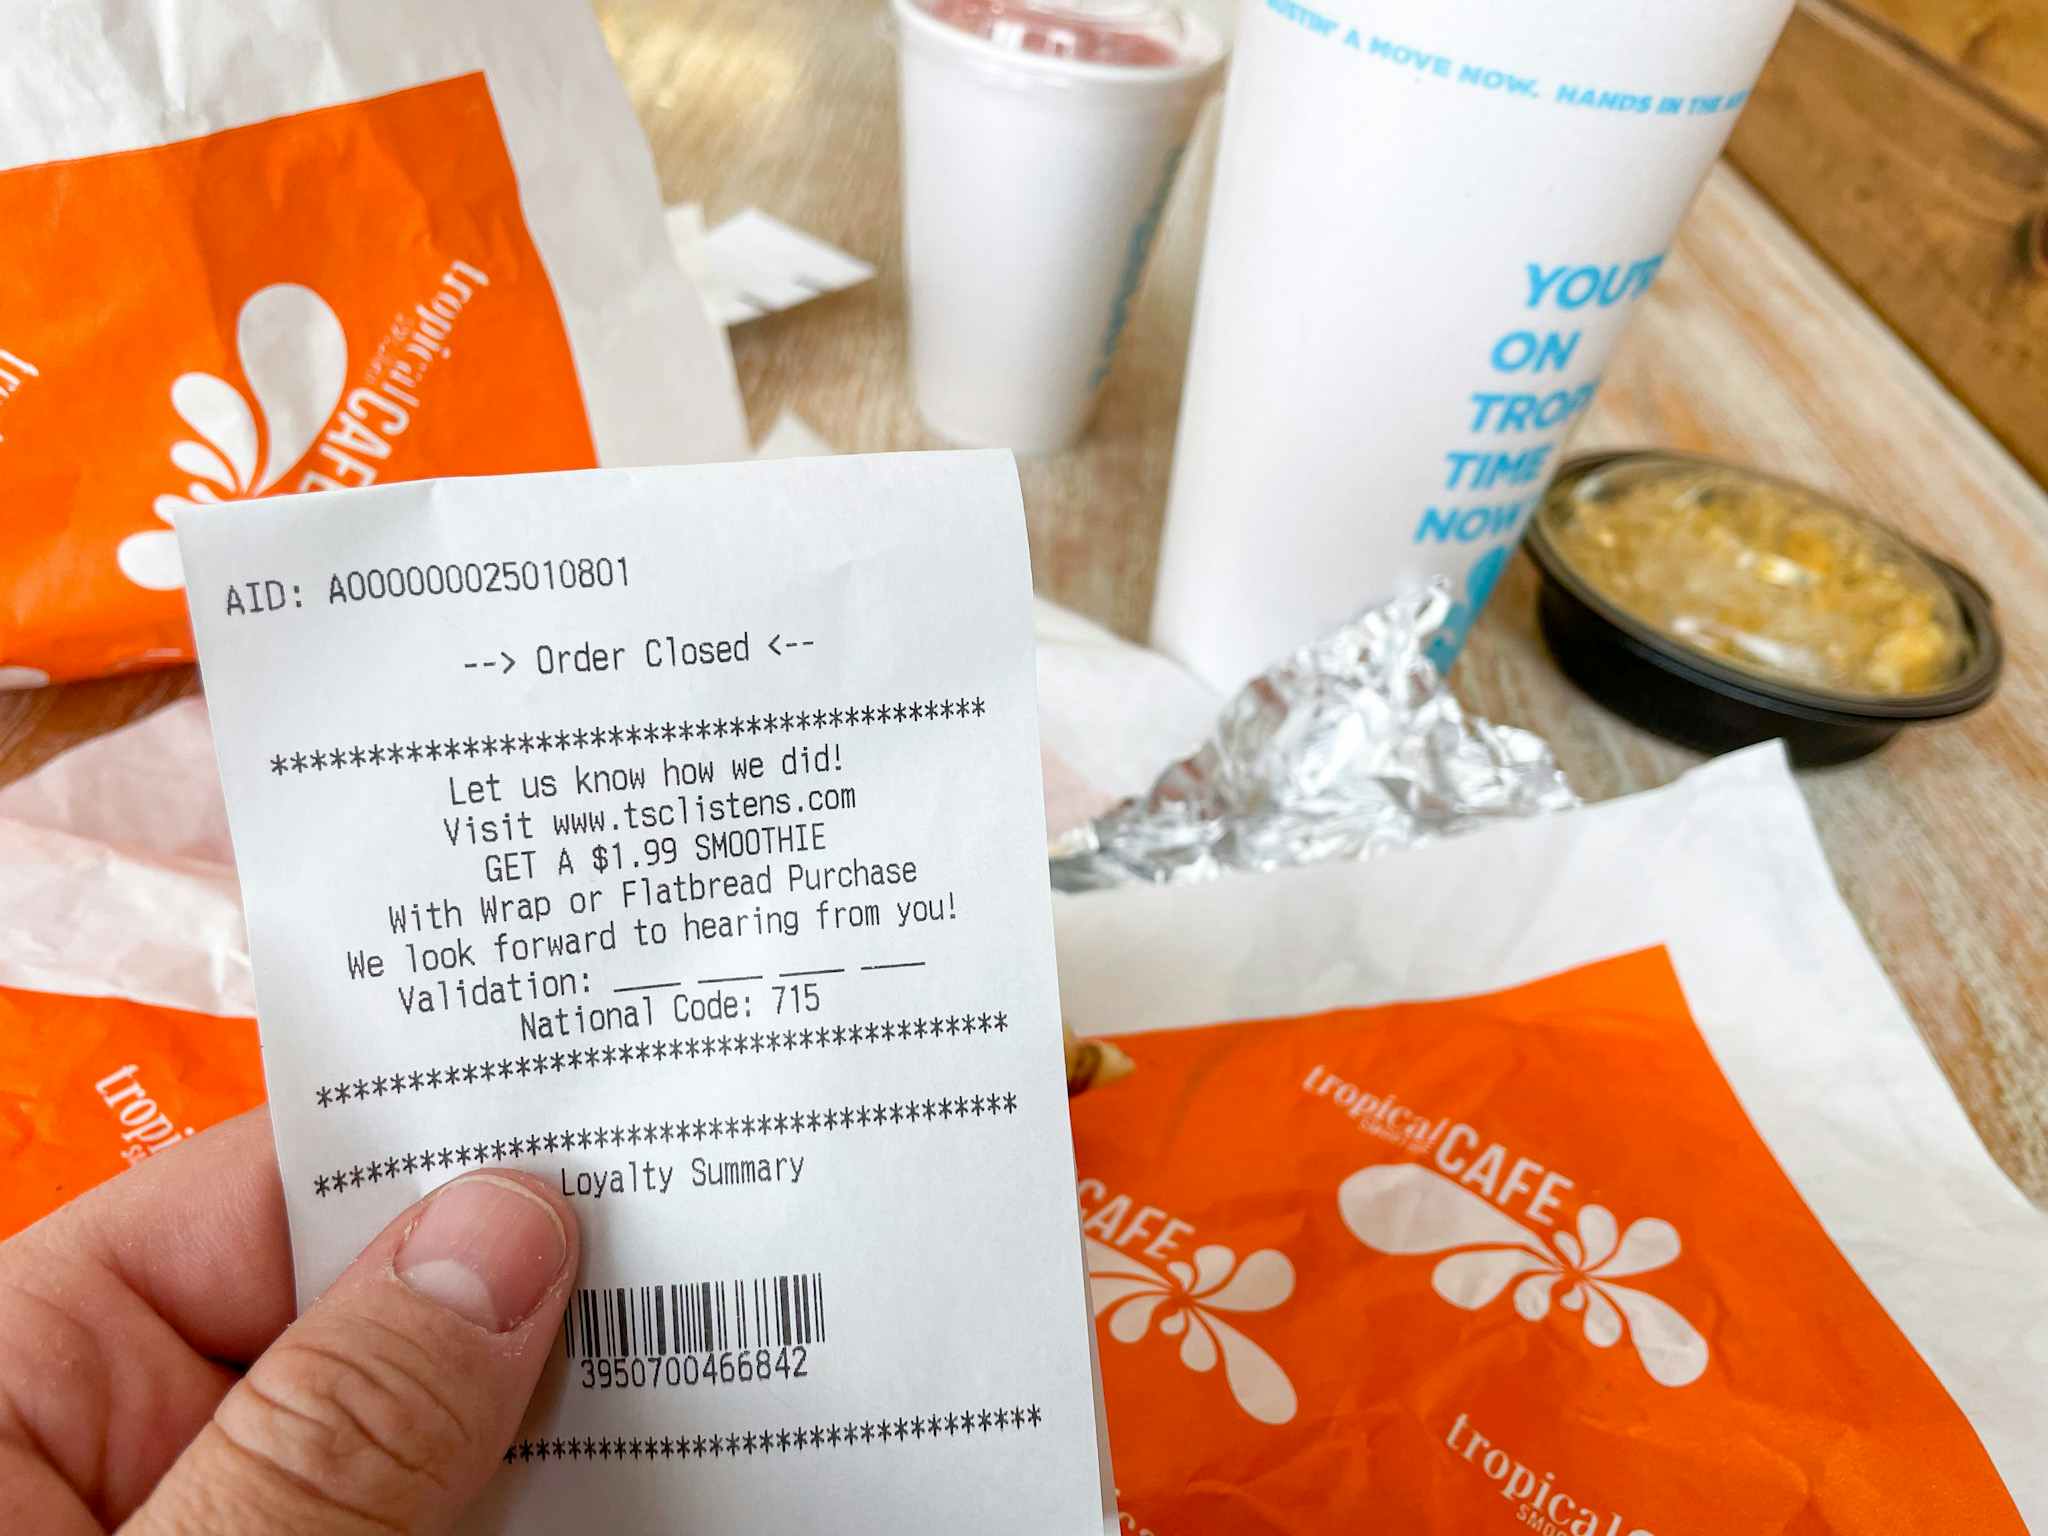 A person holding a Tropical Cafe smoothie receipt which gets them fast food deals next visit.